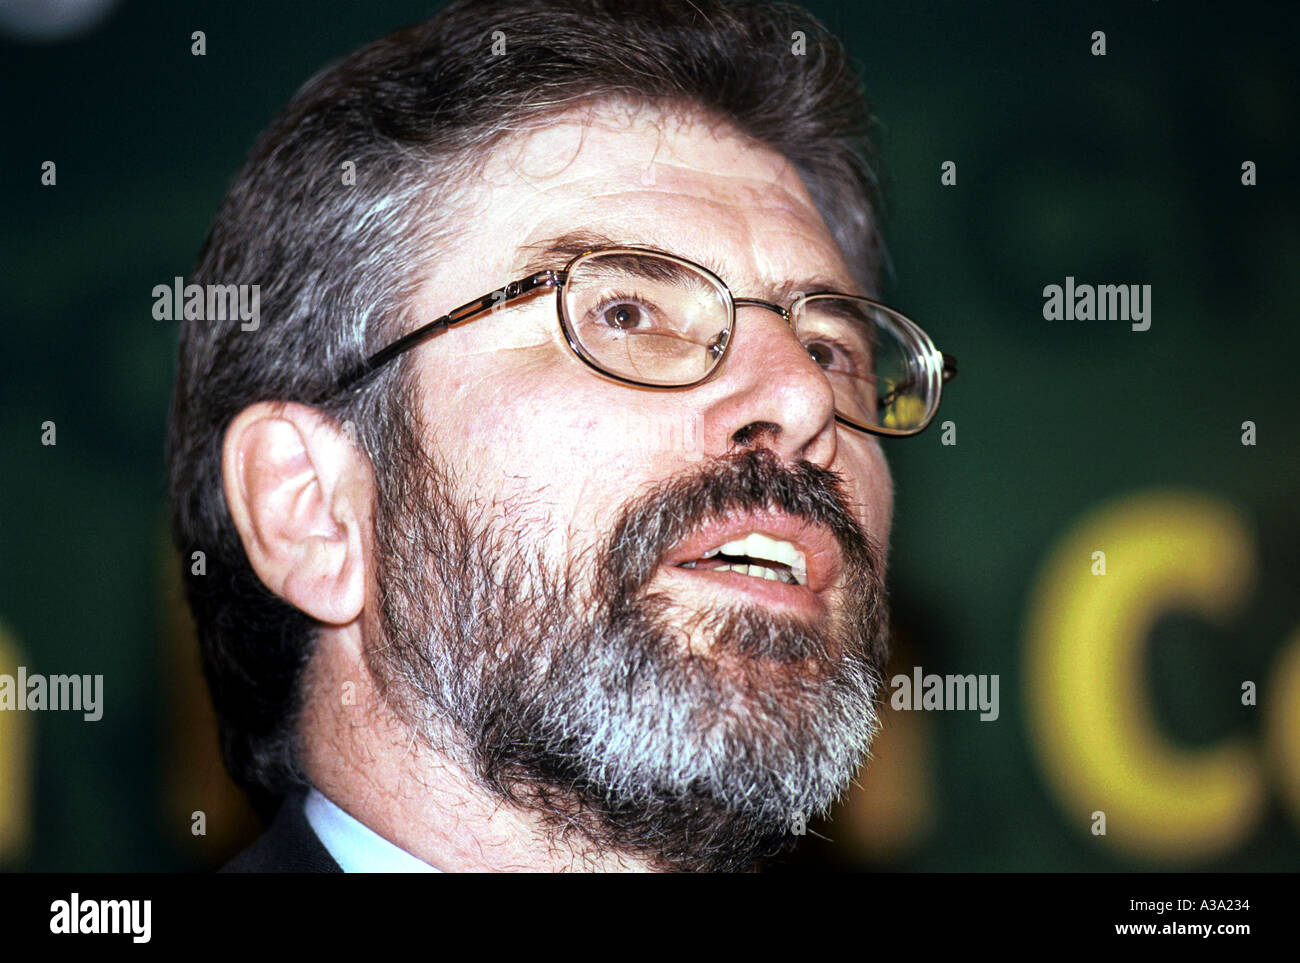 Mar 04 2002 Sinn Fein President GERRY ADAMS MLA MP speaking at the election launch of a local candidate  Stock Photo